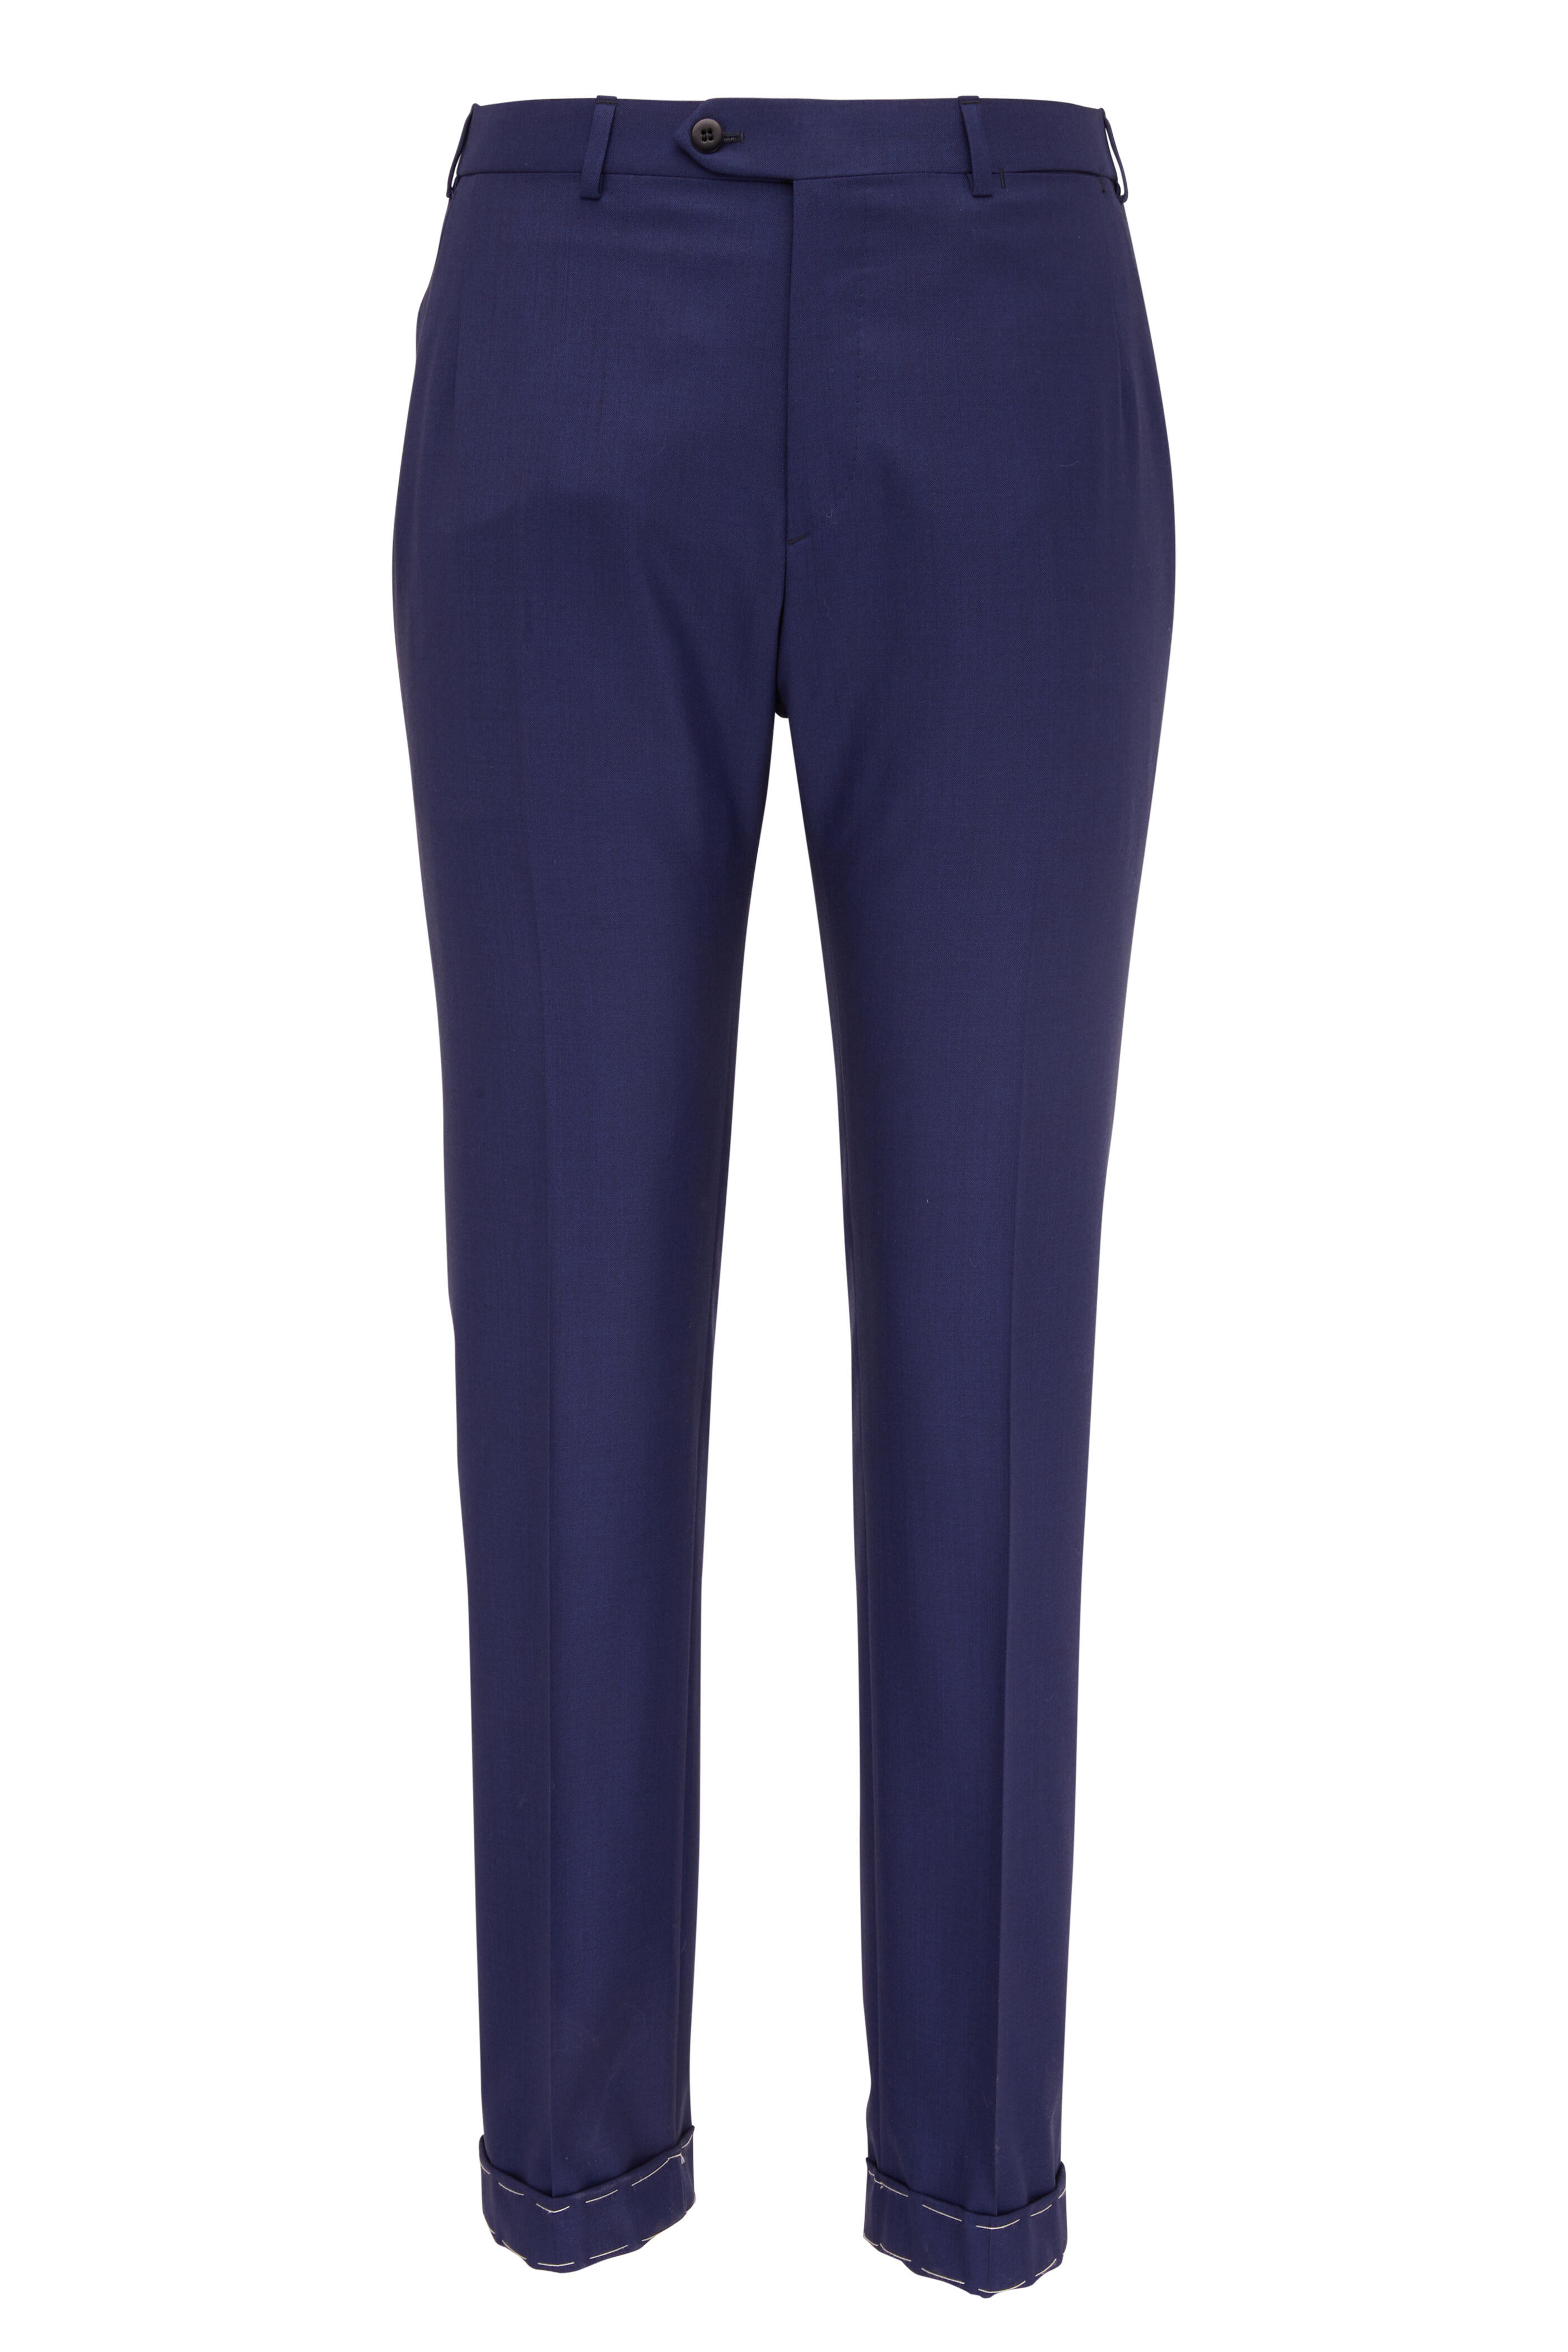 Brioni - Solid Bright Navy Wool Suit | Mitchell Stores